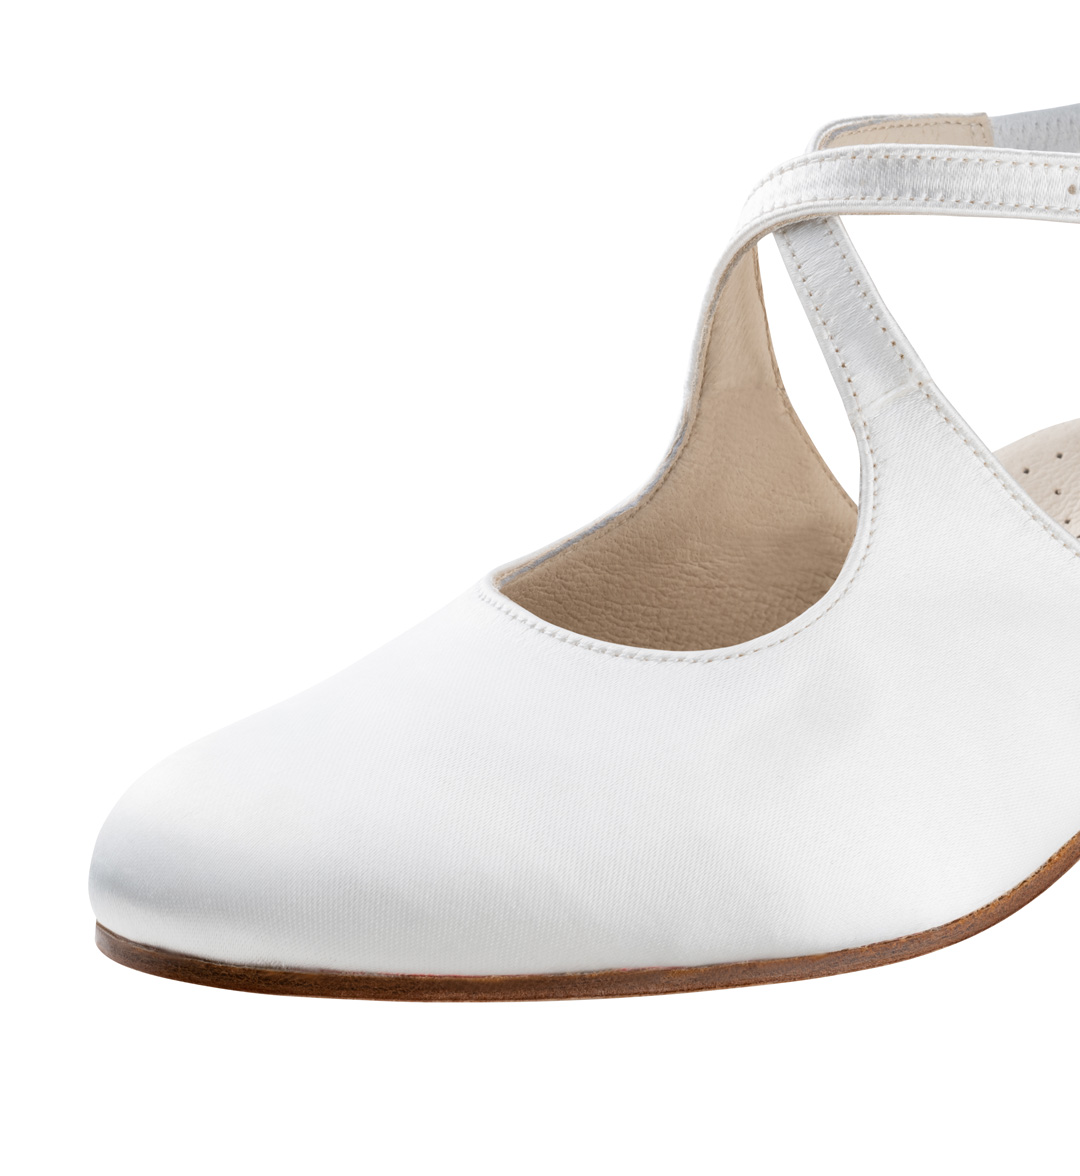 Front view of Werner Kern bridal shoe with leather sole